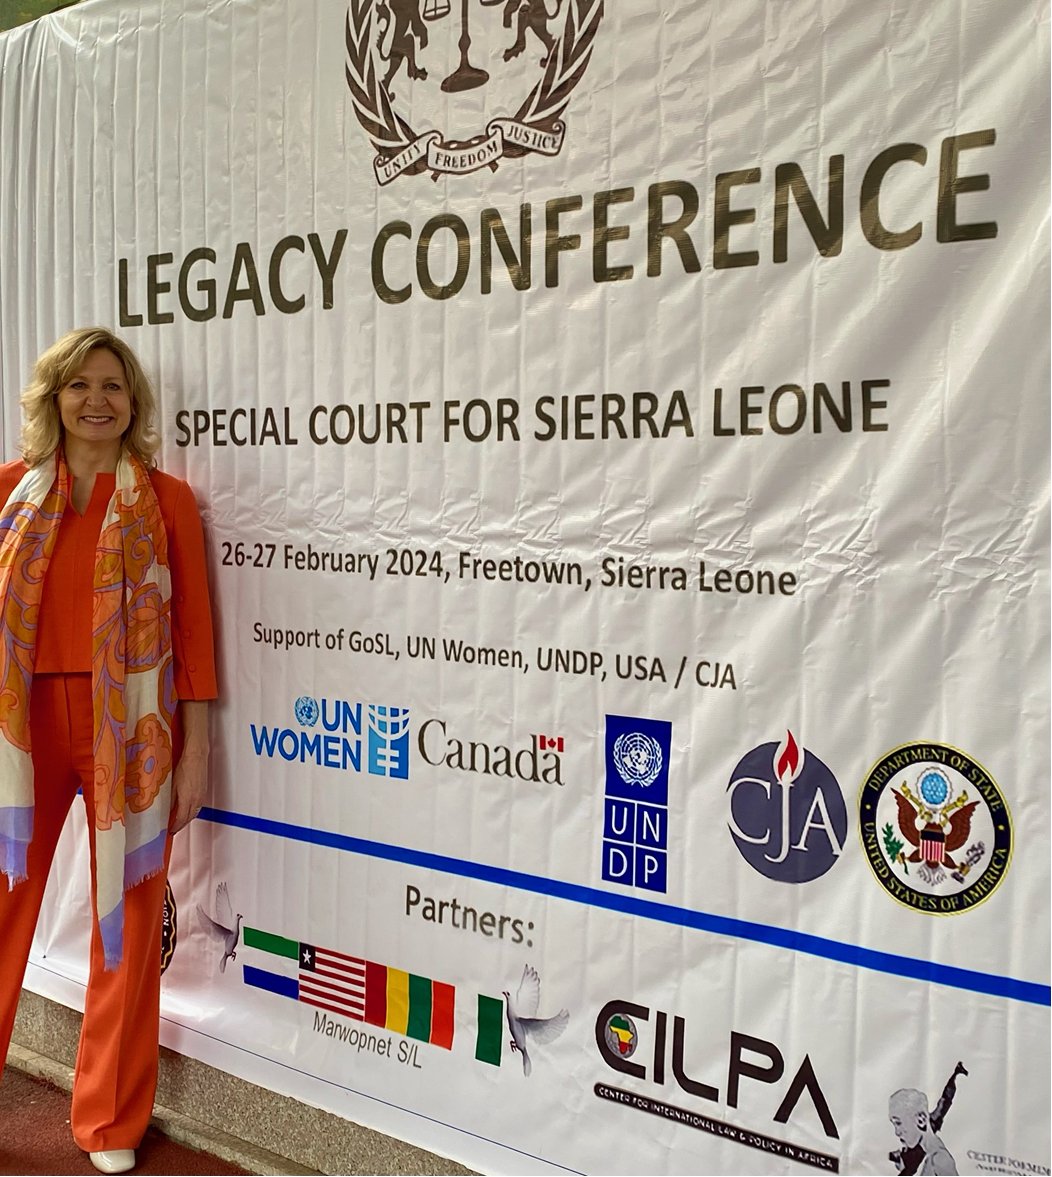 Thrilled to be in Freetown to celebrate the legacy of the Special Court for Sierra Leone! Inspired by the history of this institution and the courage of the Sierra Leonean people. 🇸🇱 🇺🇸 @SpecialCourt